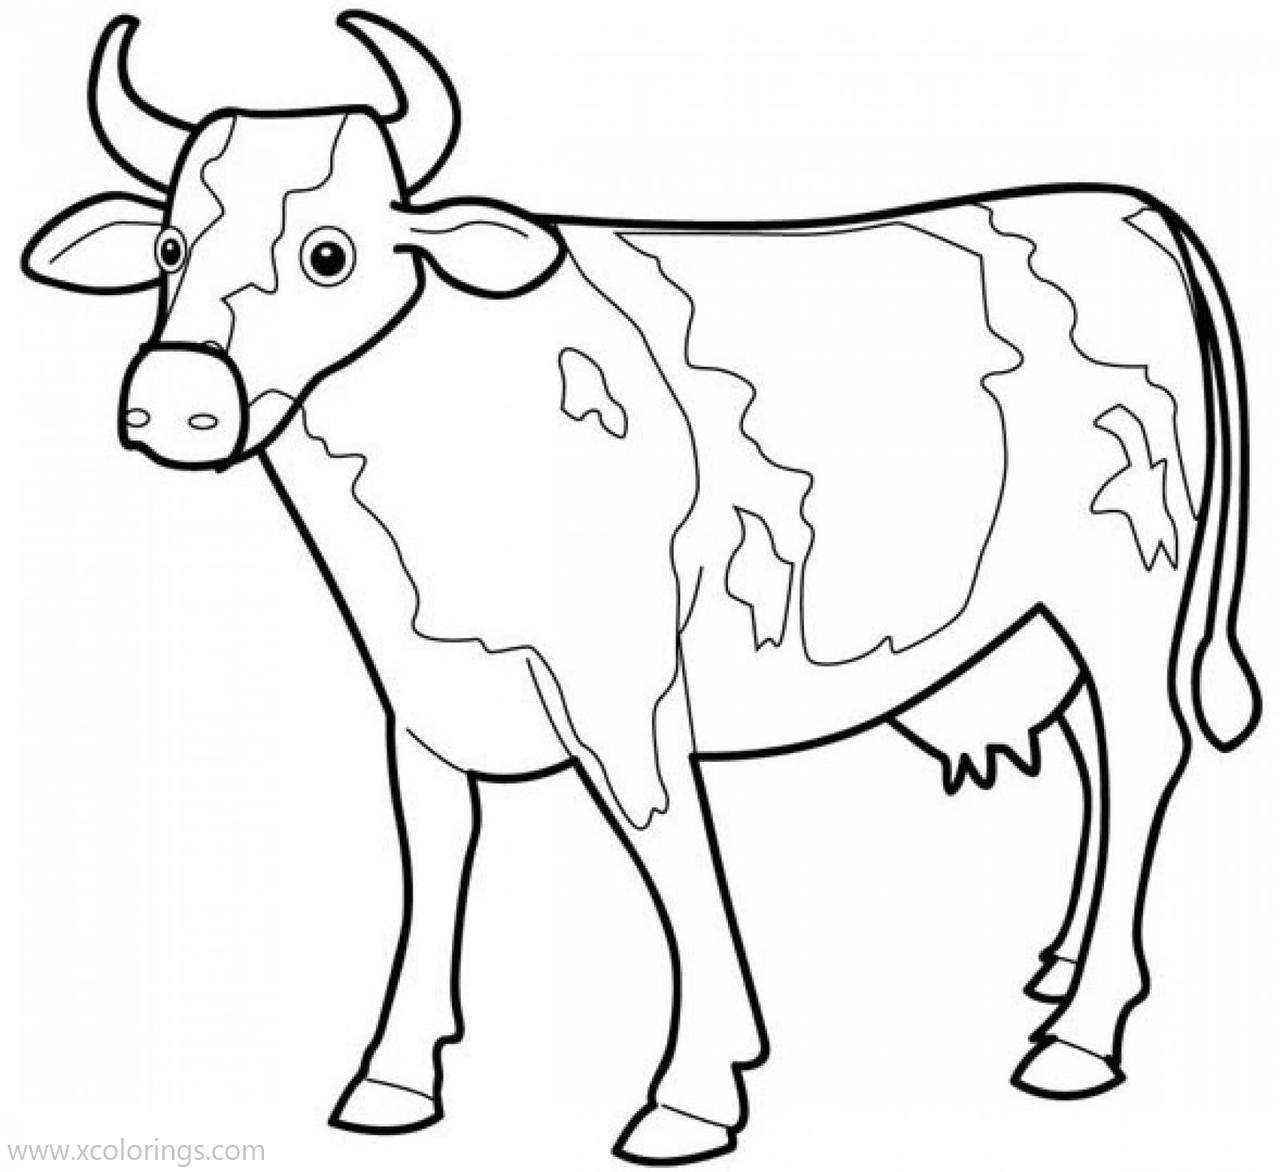 Free Livestock Cow Coloring Pages printable